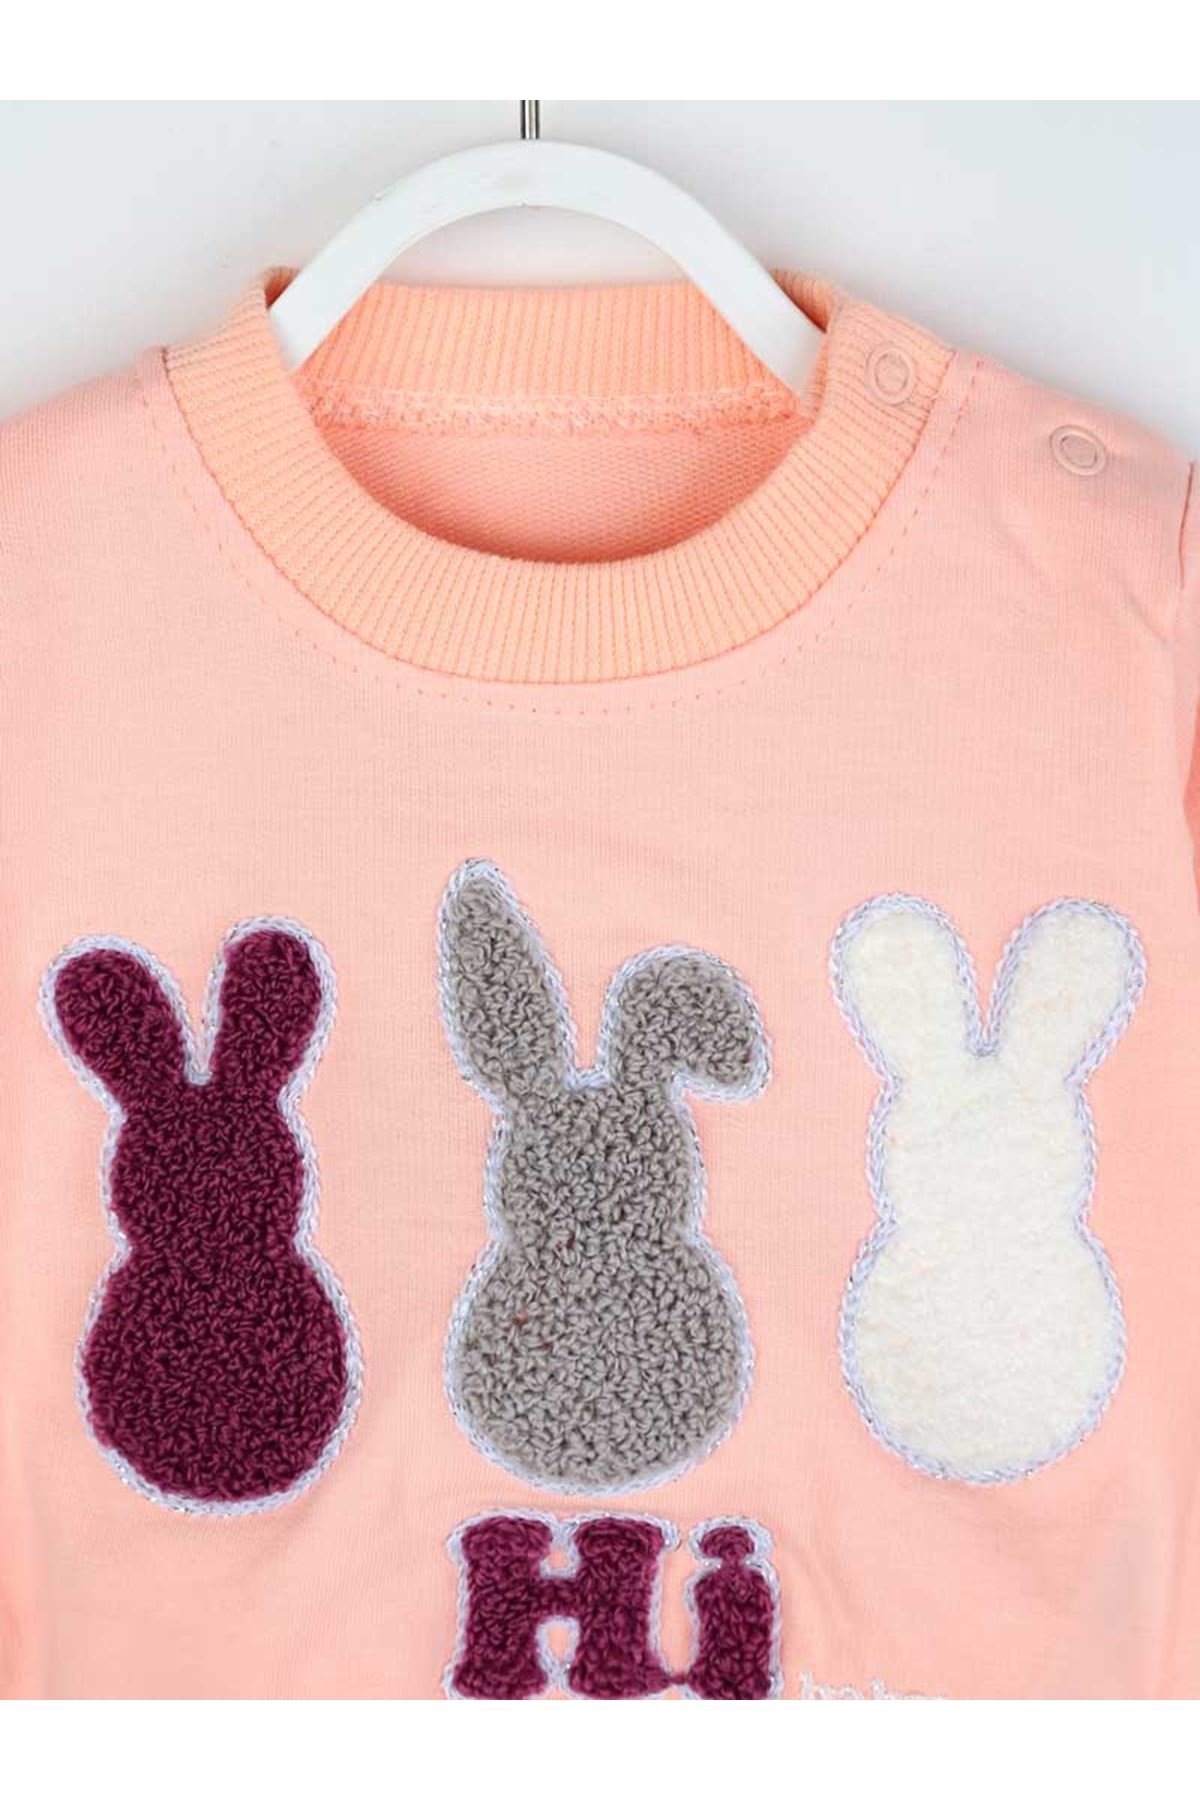 Powder Pink Baby Girl Rabbit Vetch 2 Piece Set Tracksuit Bottom Wear Top Outfit Cotton Casual Casual Outfit Models